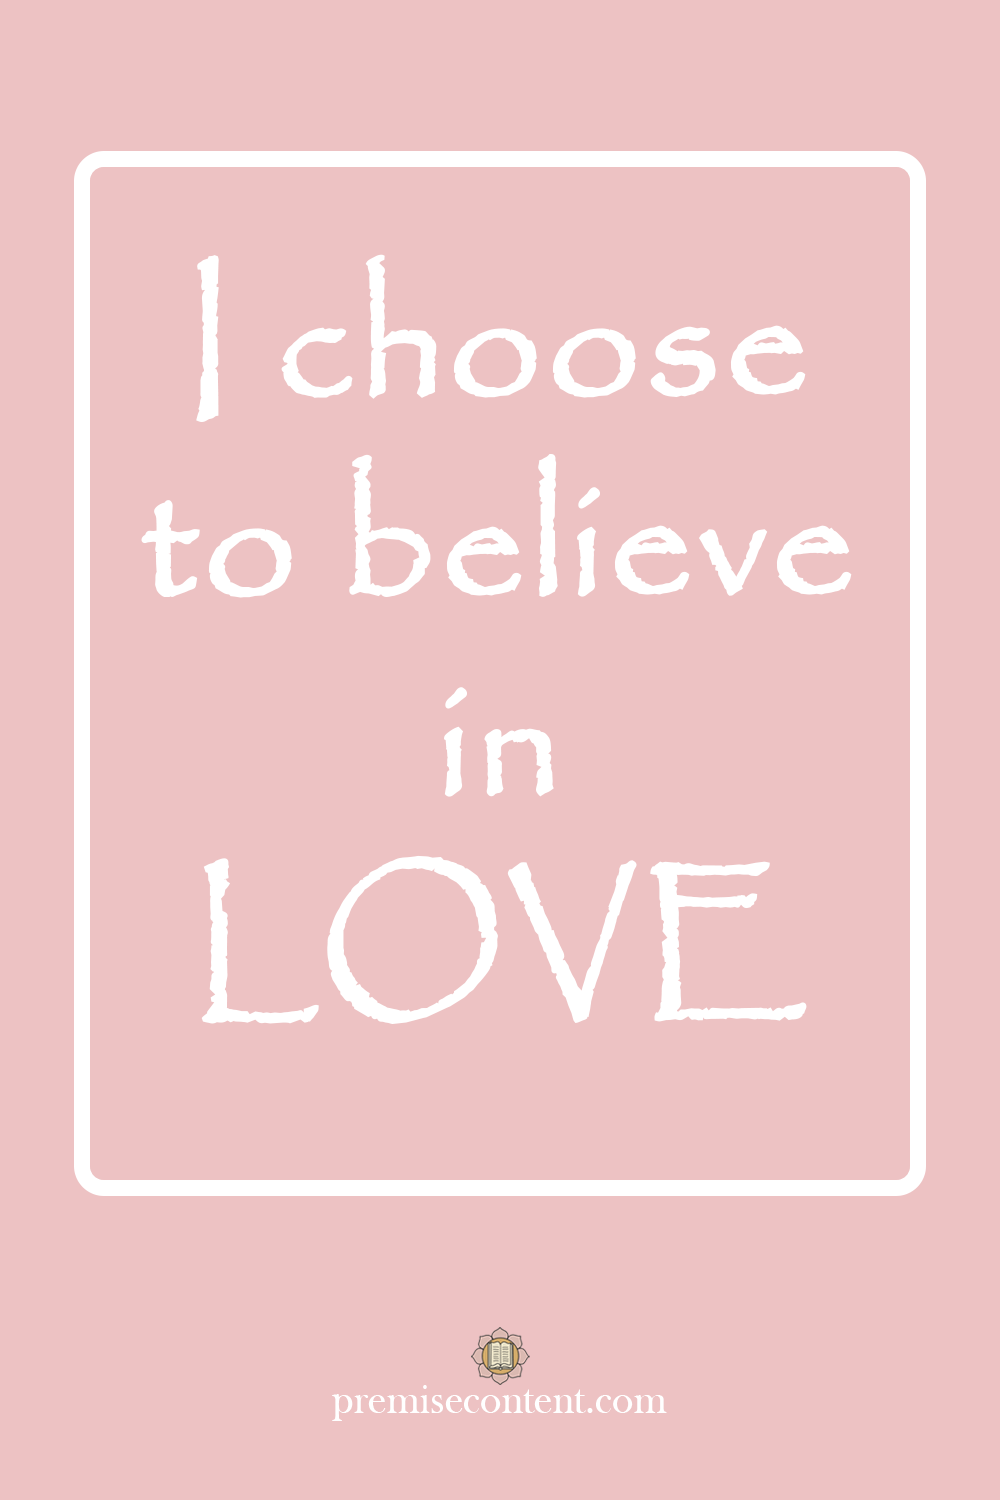 I choose to believe in LOVE - Positive Affirmation